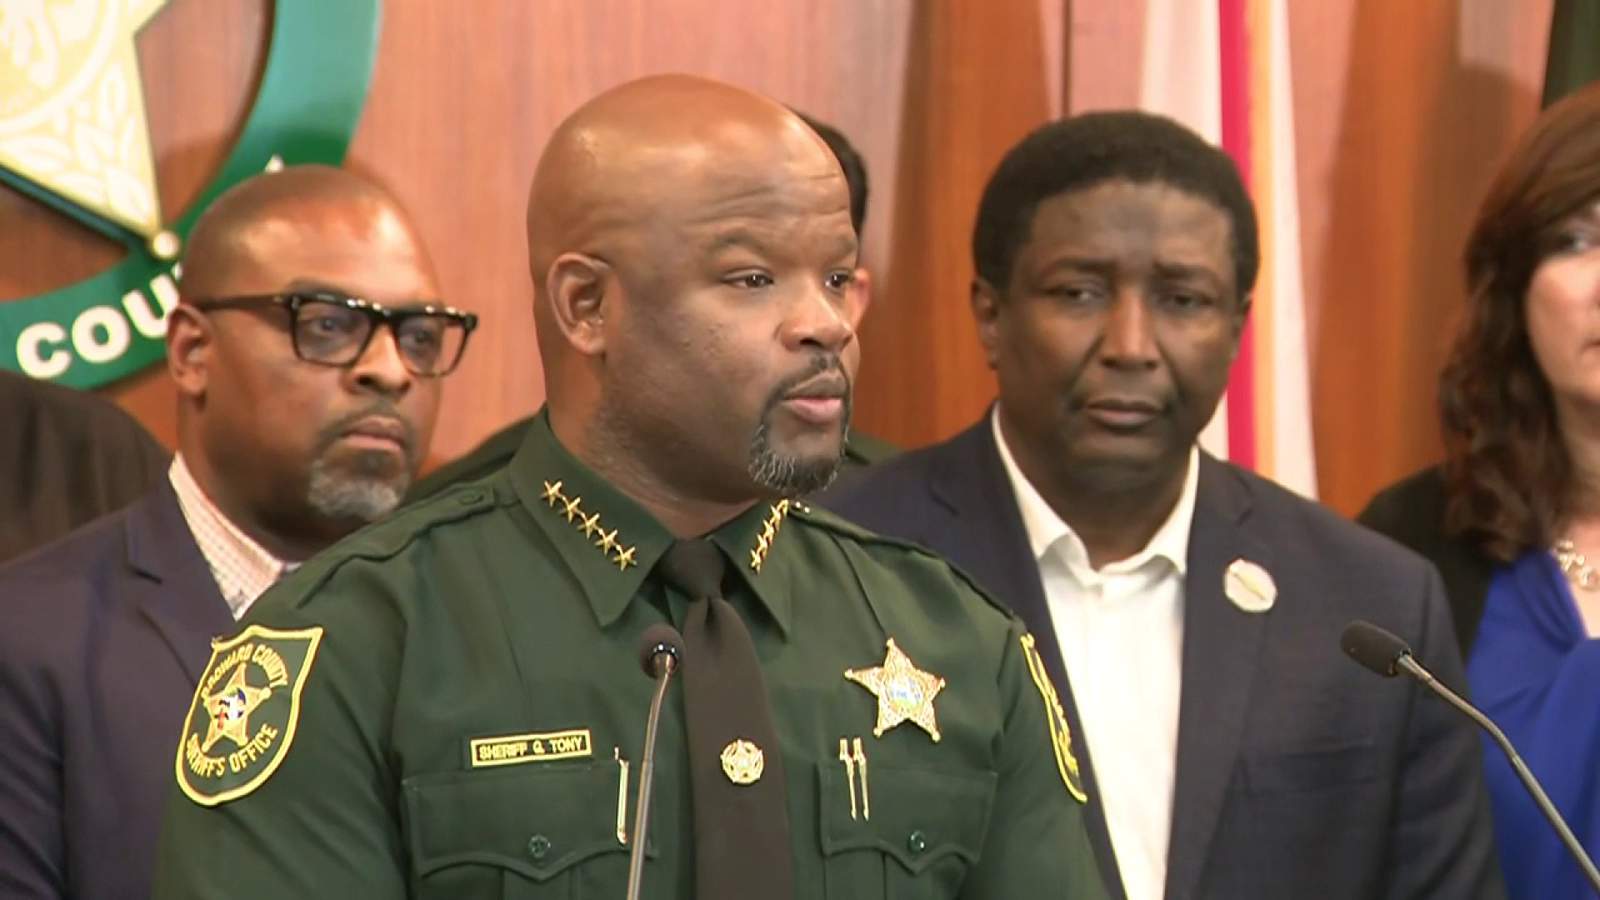 Broward County sheriff announces implementation of Use of Force Review Board